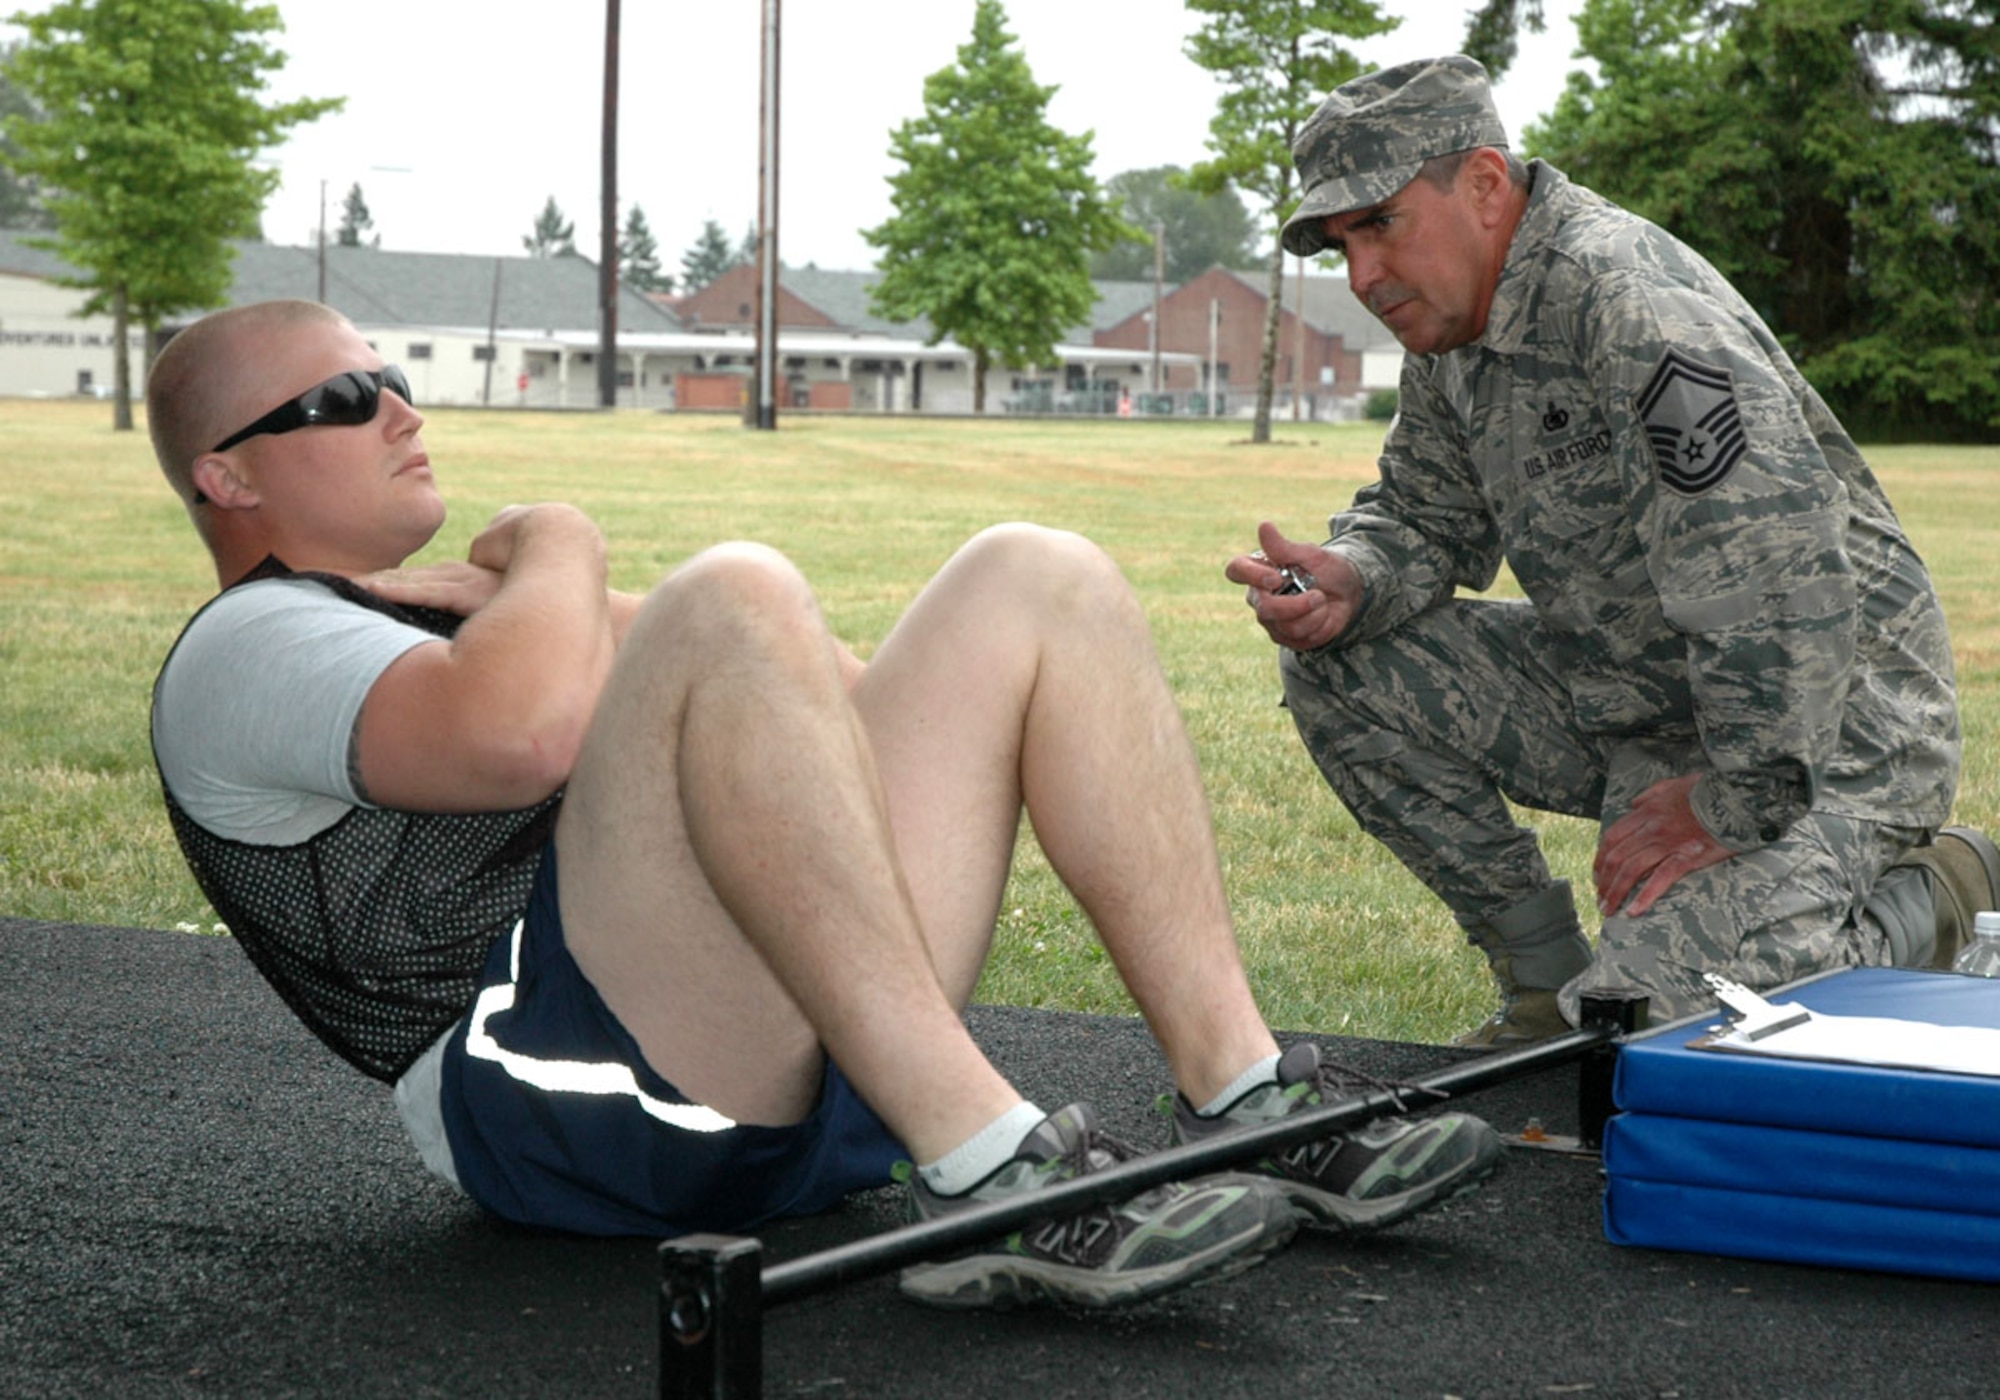 Physical fitness uniform has wear guidelines too > 446th Airlift Wing > News